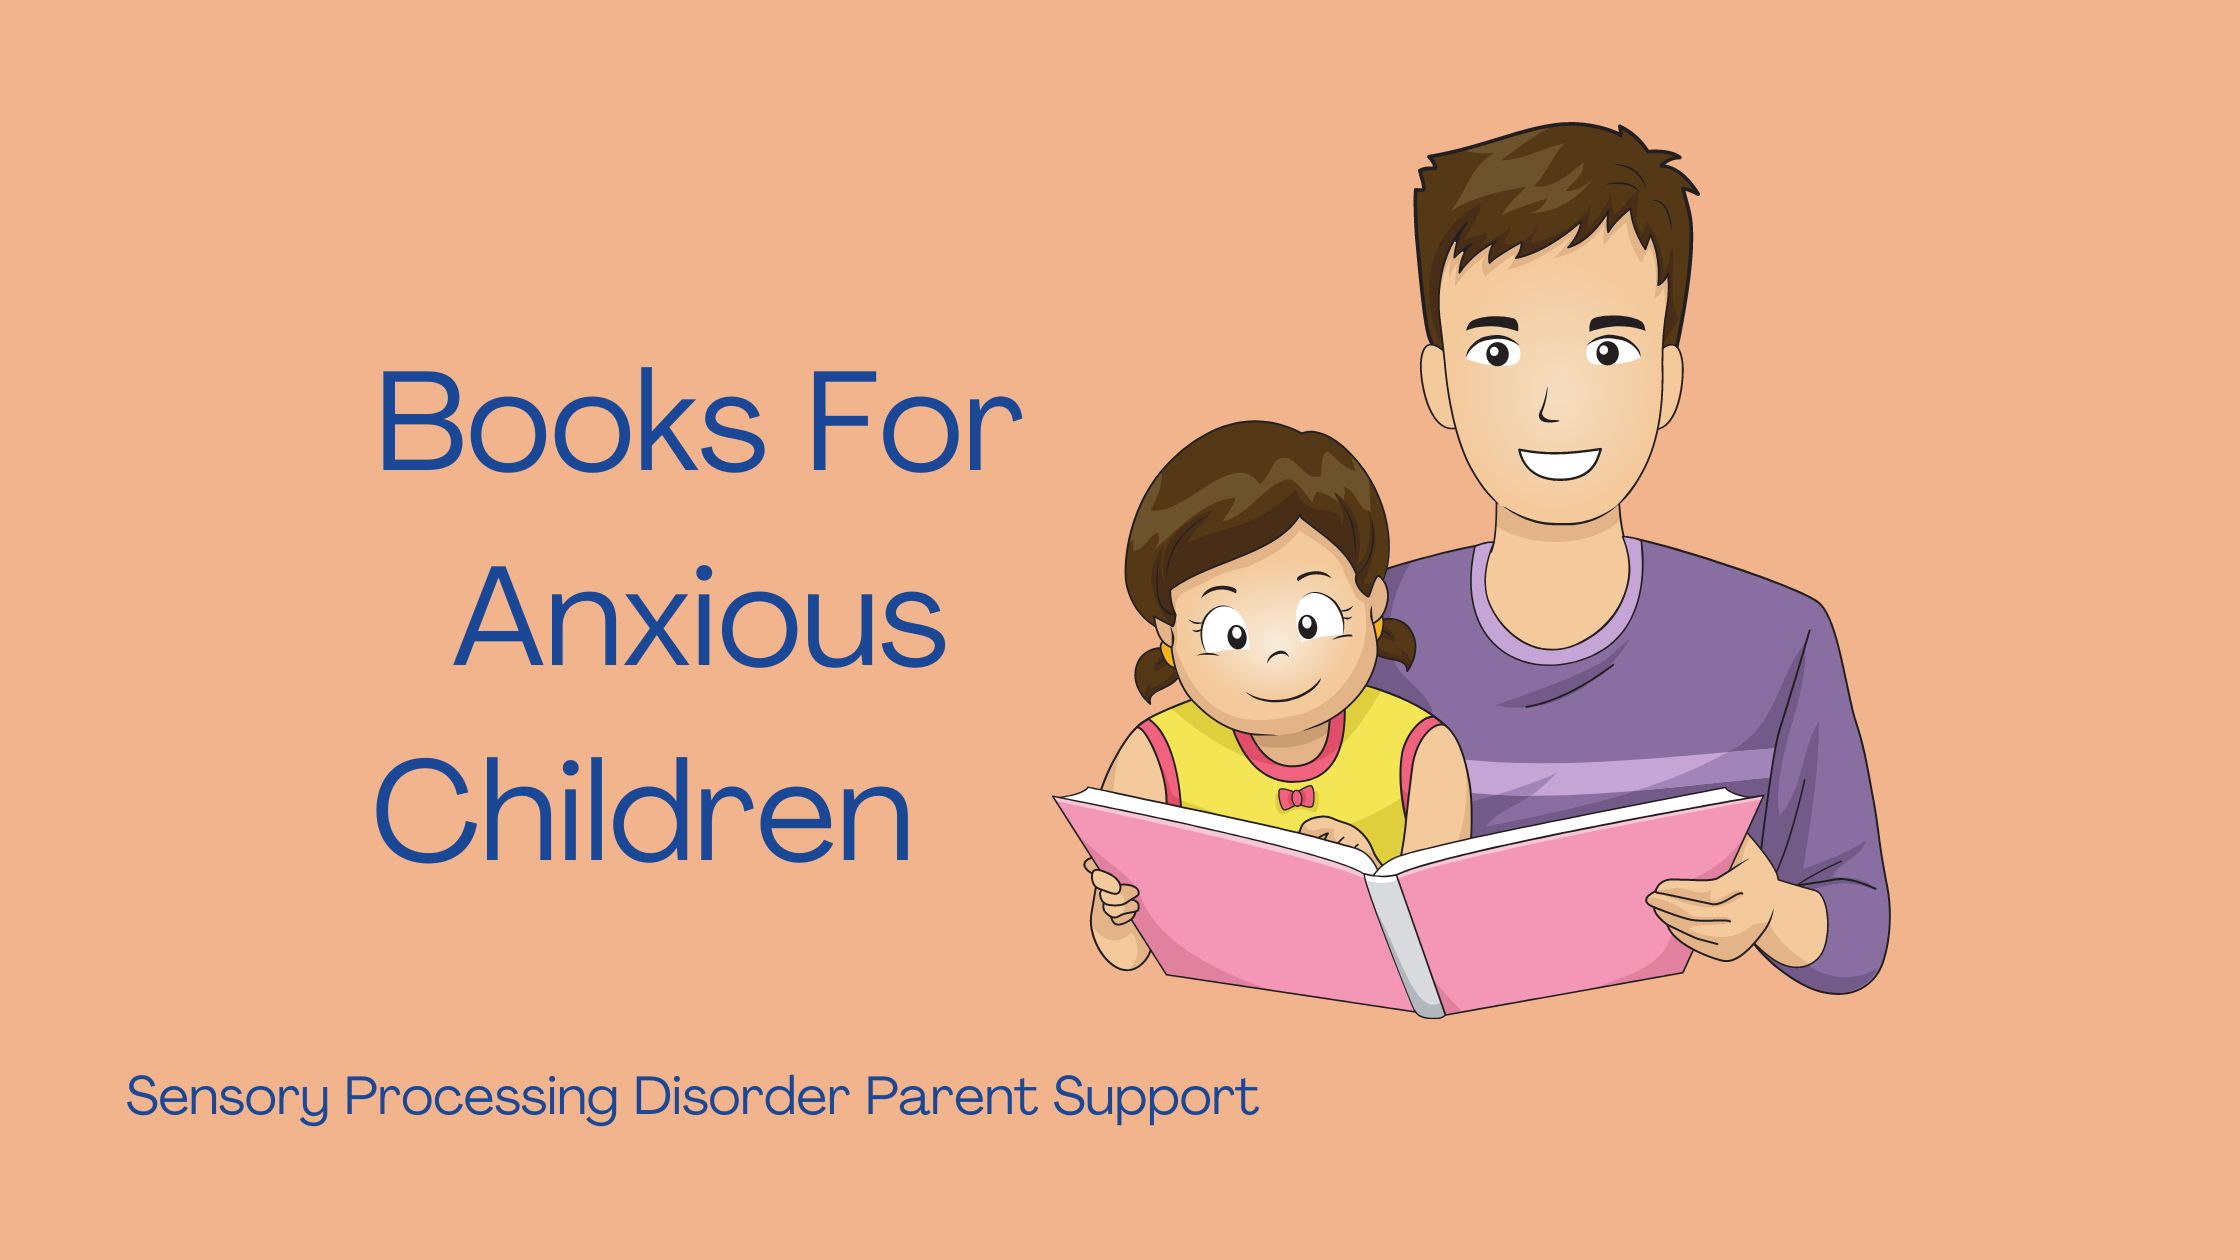 parenting reading book to anxious child about anxiety Books For Anxious Children